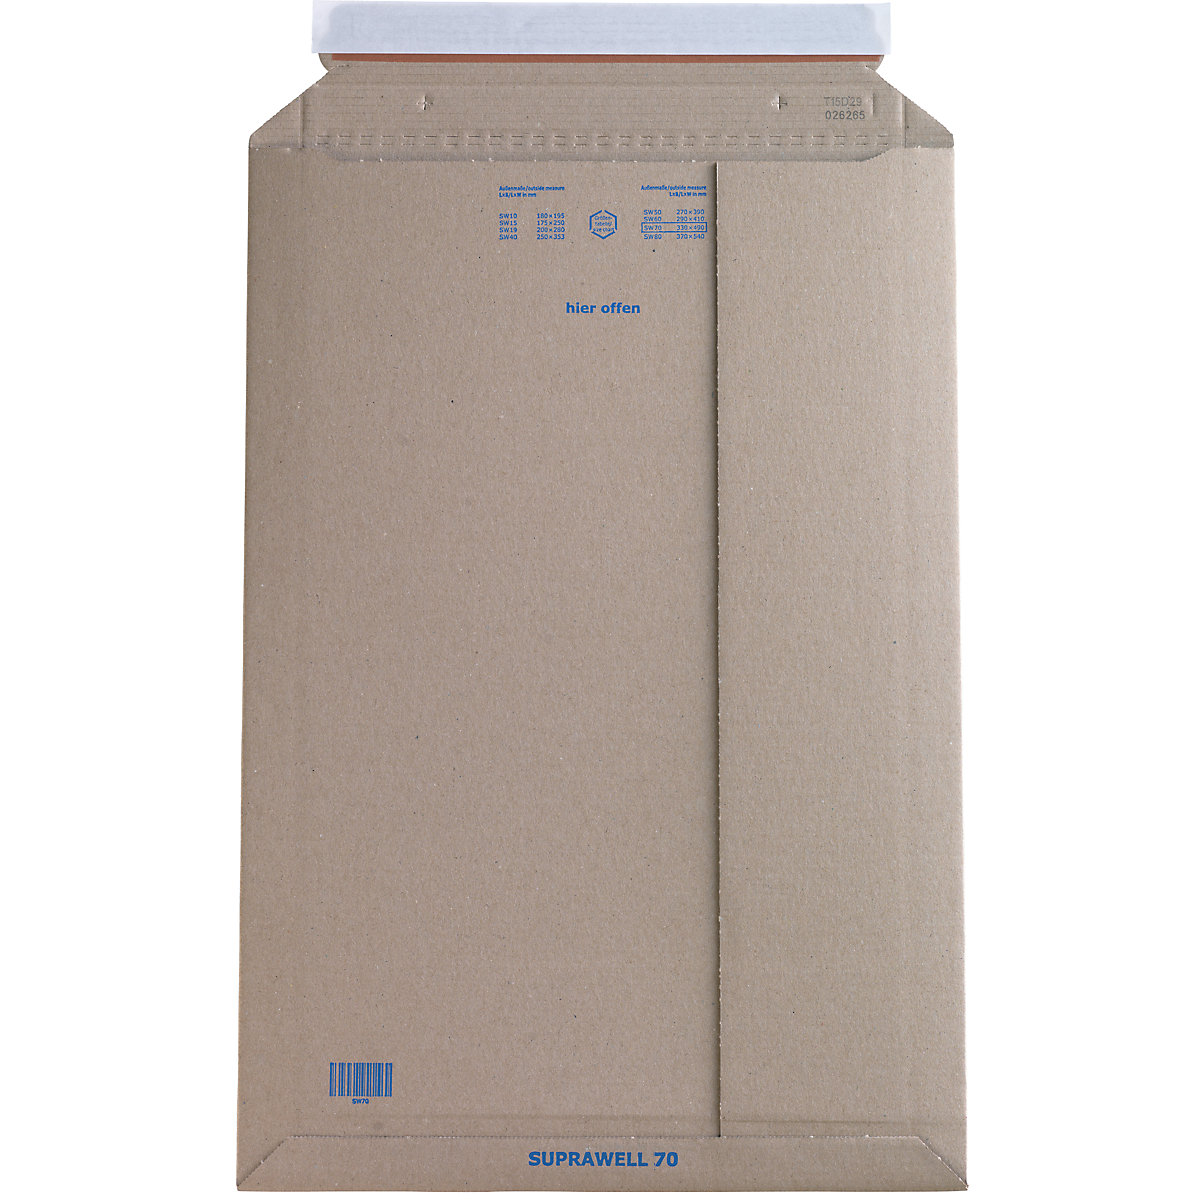 Dispatch bags, filling height up to 25 mm, LxW 490 x 330 mm-4